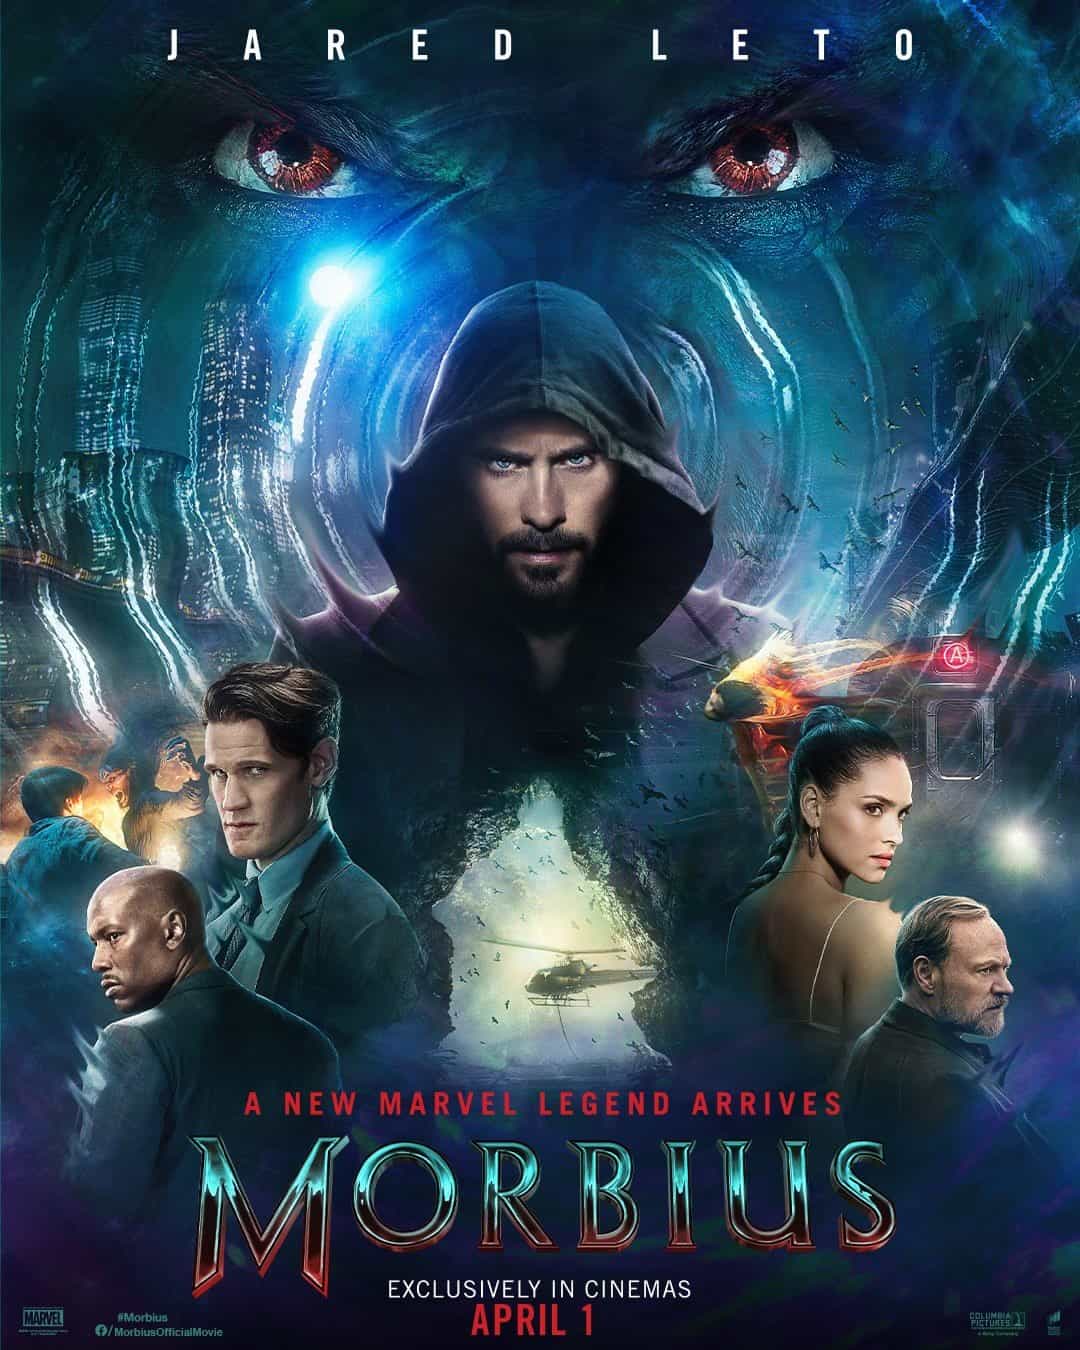 New poster released for Morbius which stars Jared Leto - the movie is released 28th January 2022 #morbius